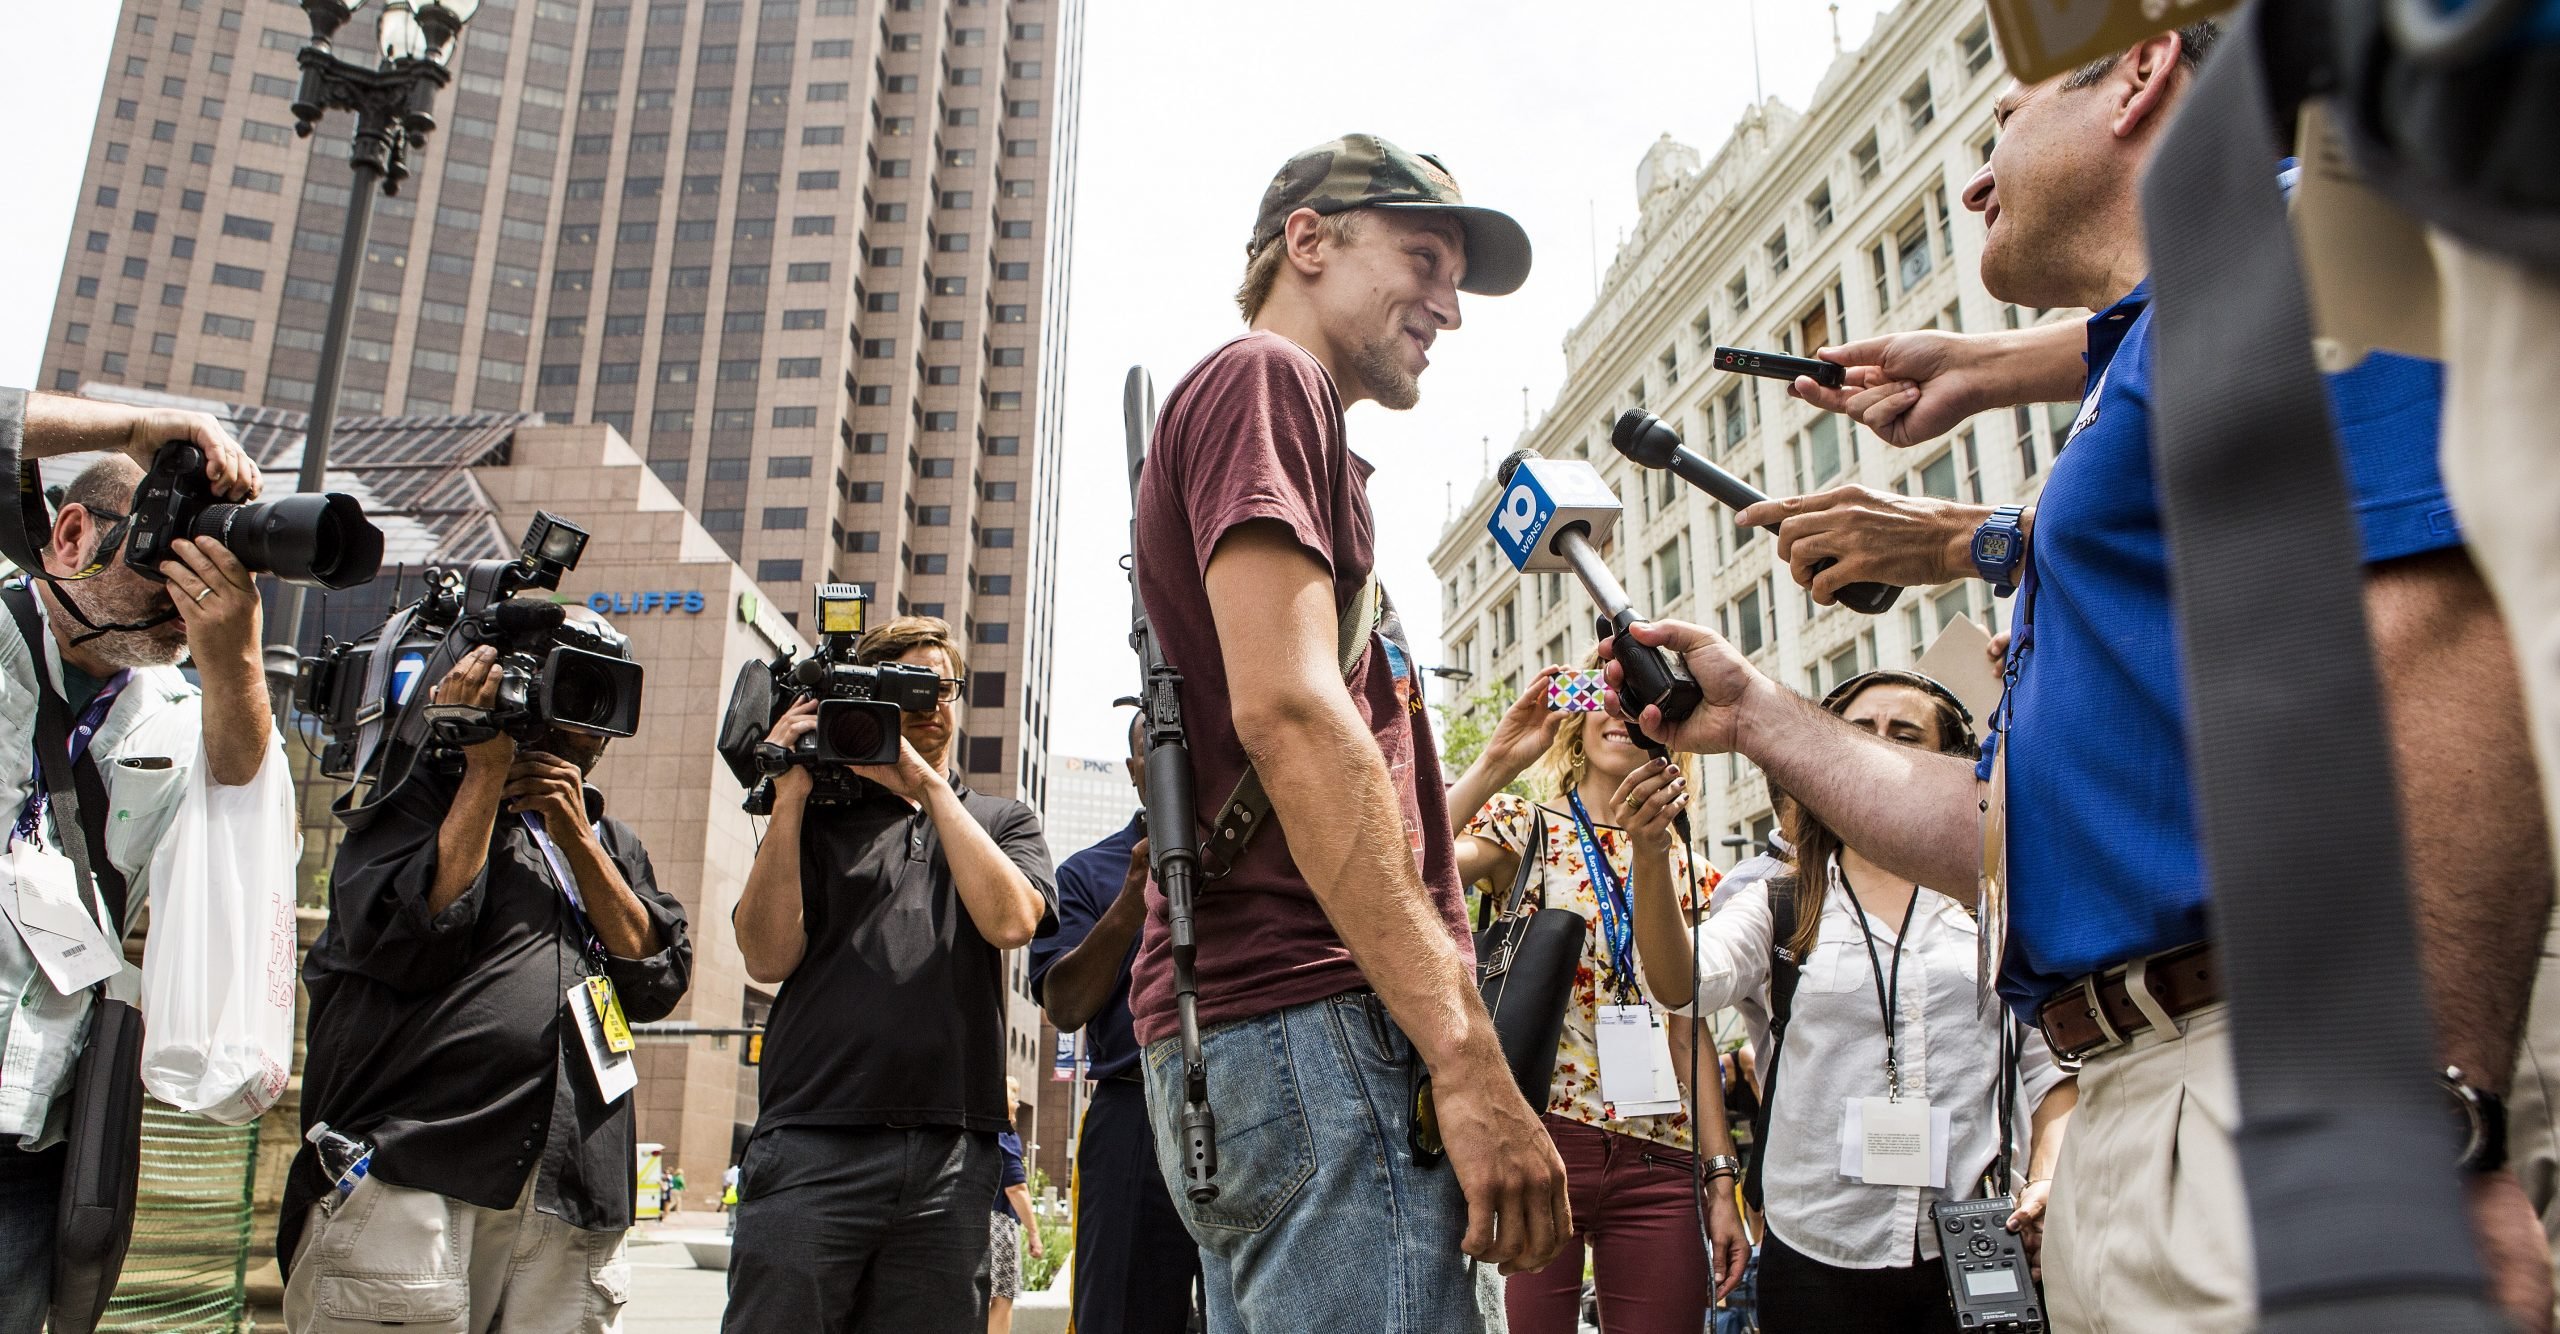 What You Need to Know About Open Carry in America